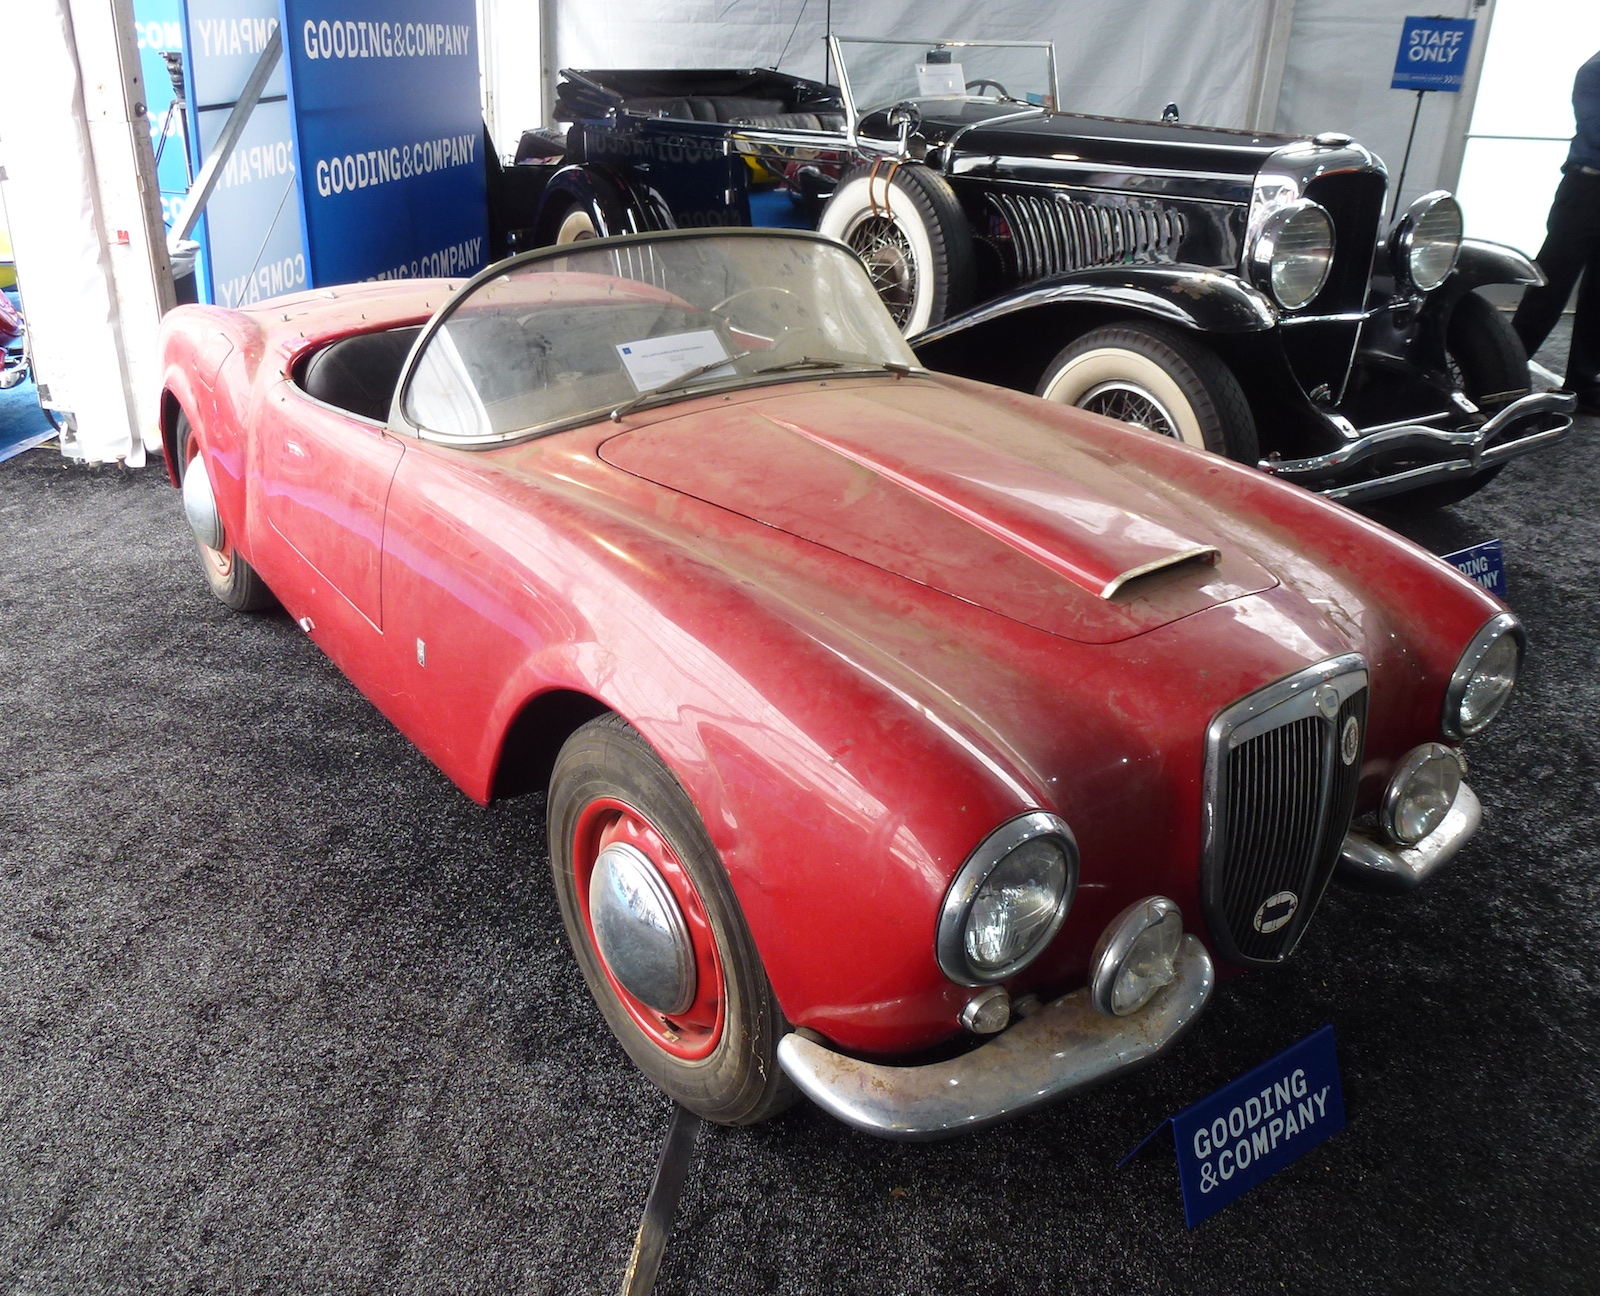 Is The Dirt As Patina Sales Strategy Falling Out Of Favor In The Collector Car Market?